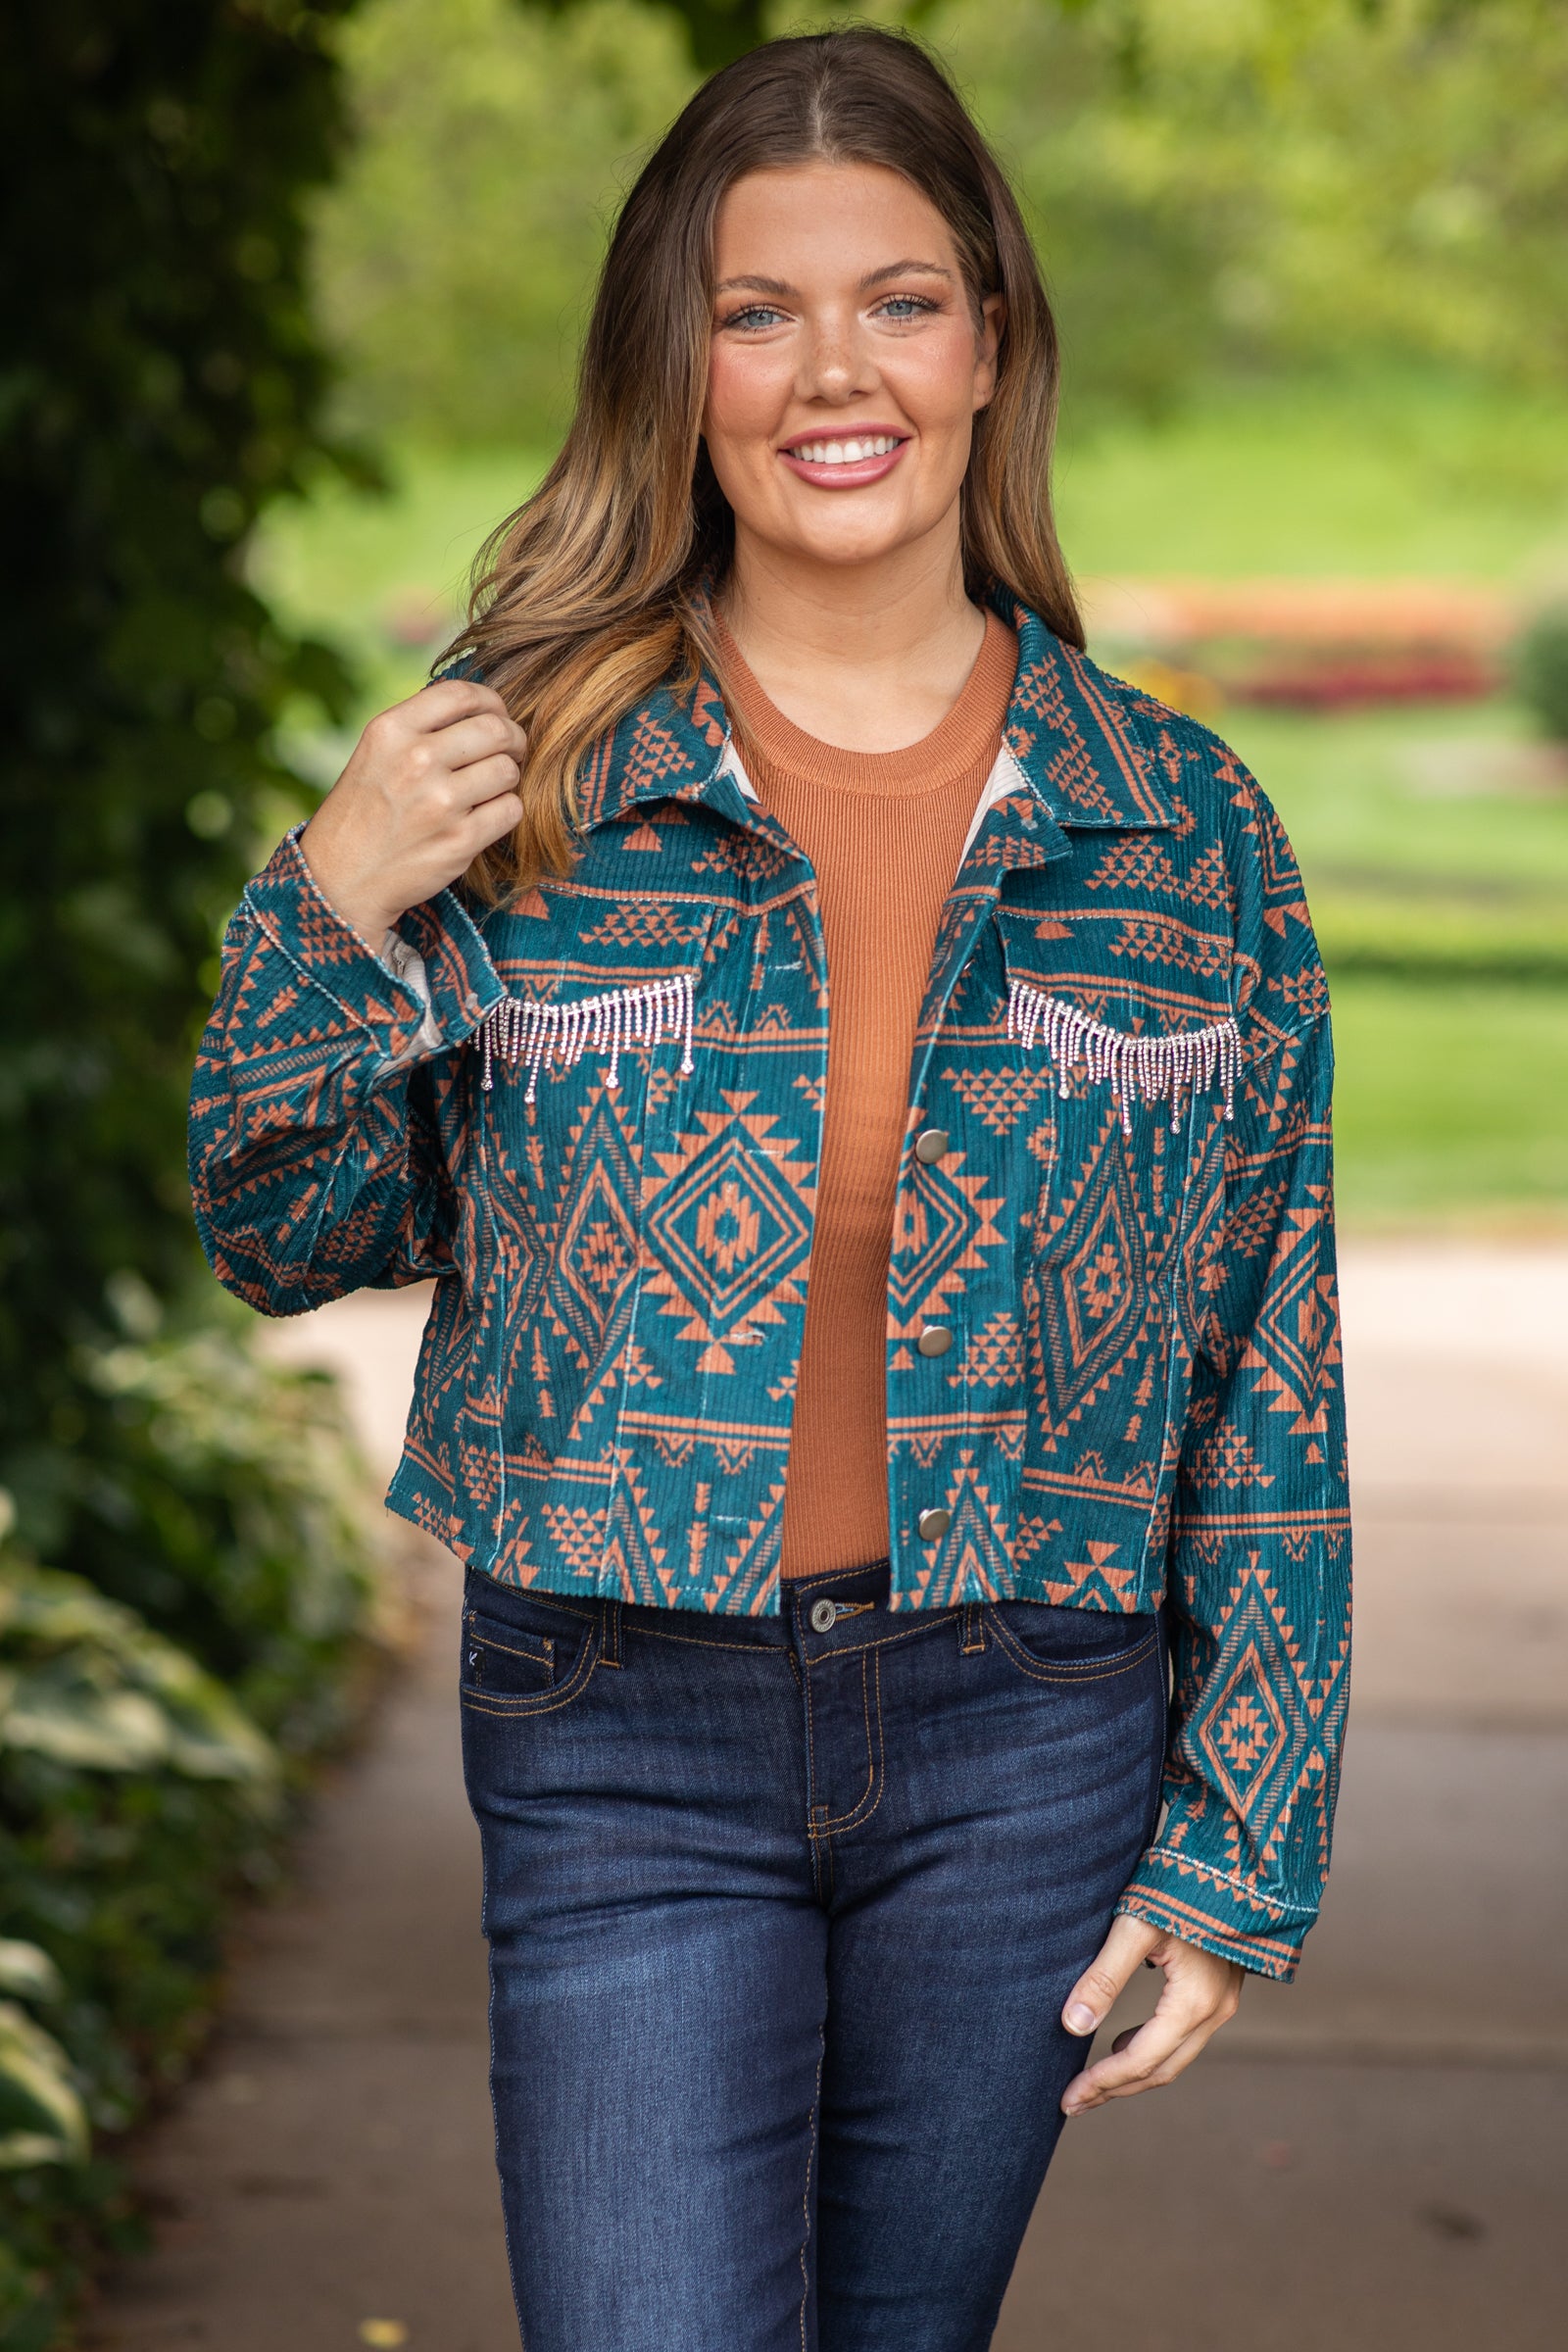 Teal and Cognac Aztec Print Jacket With Fringe